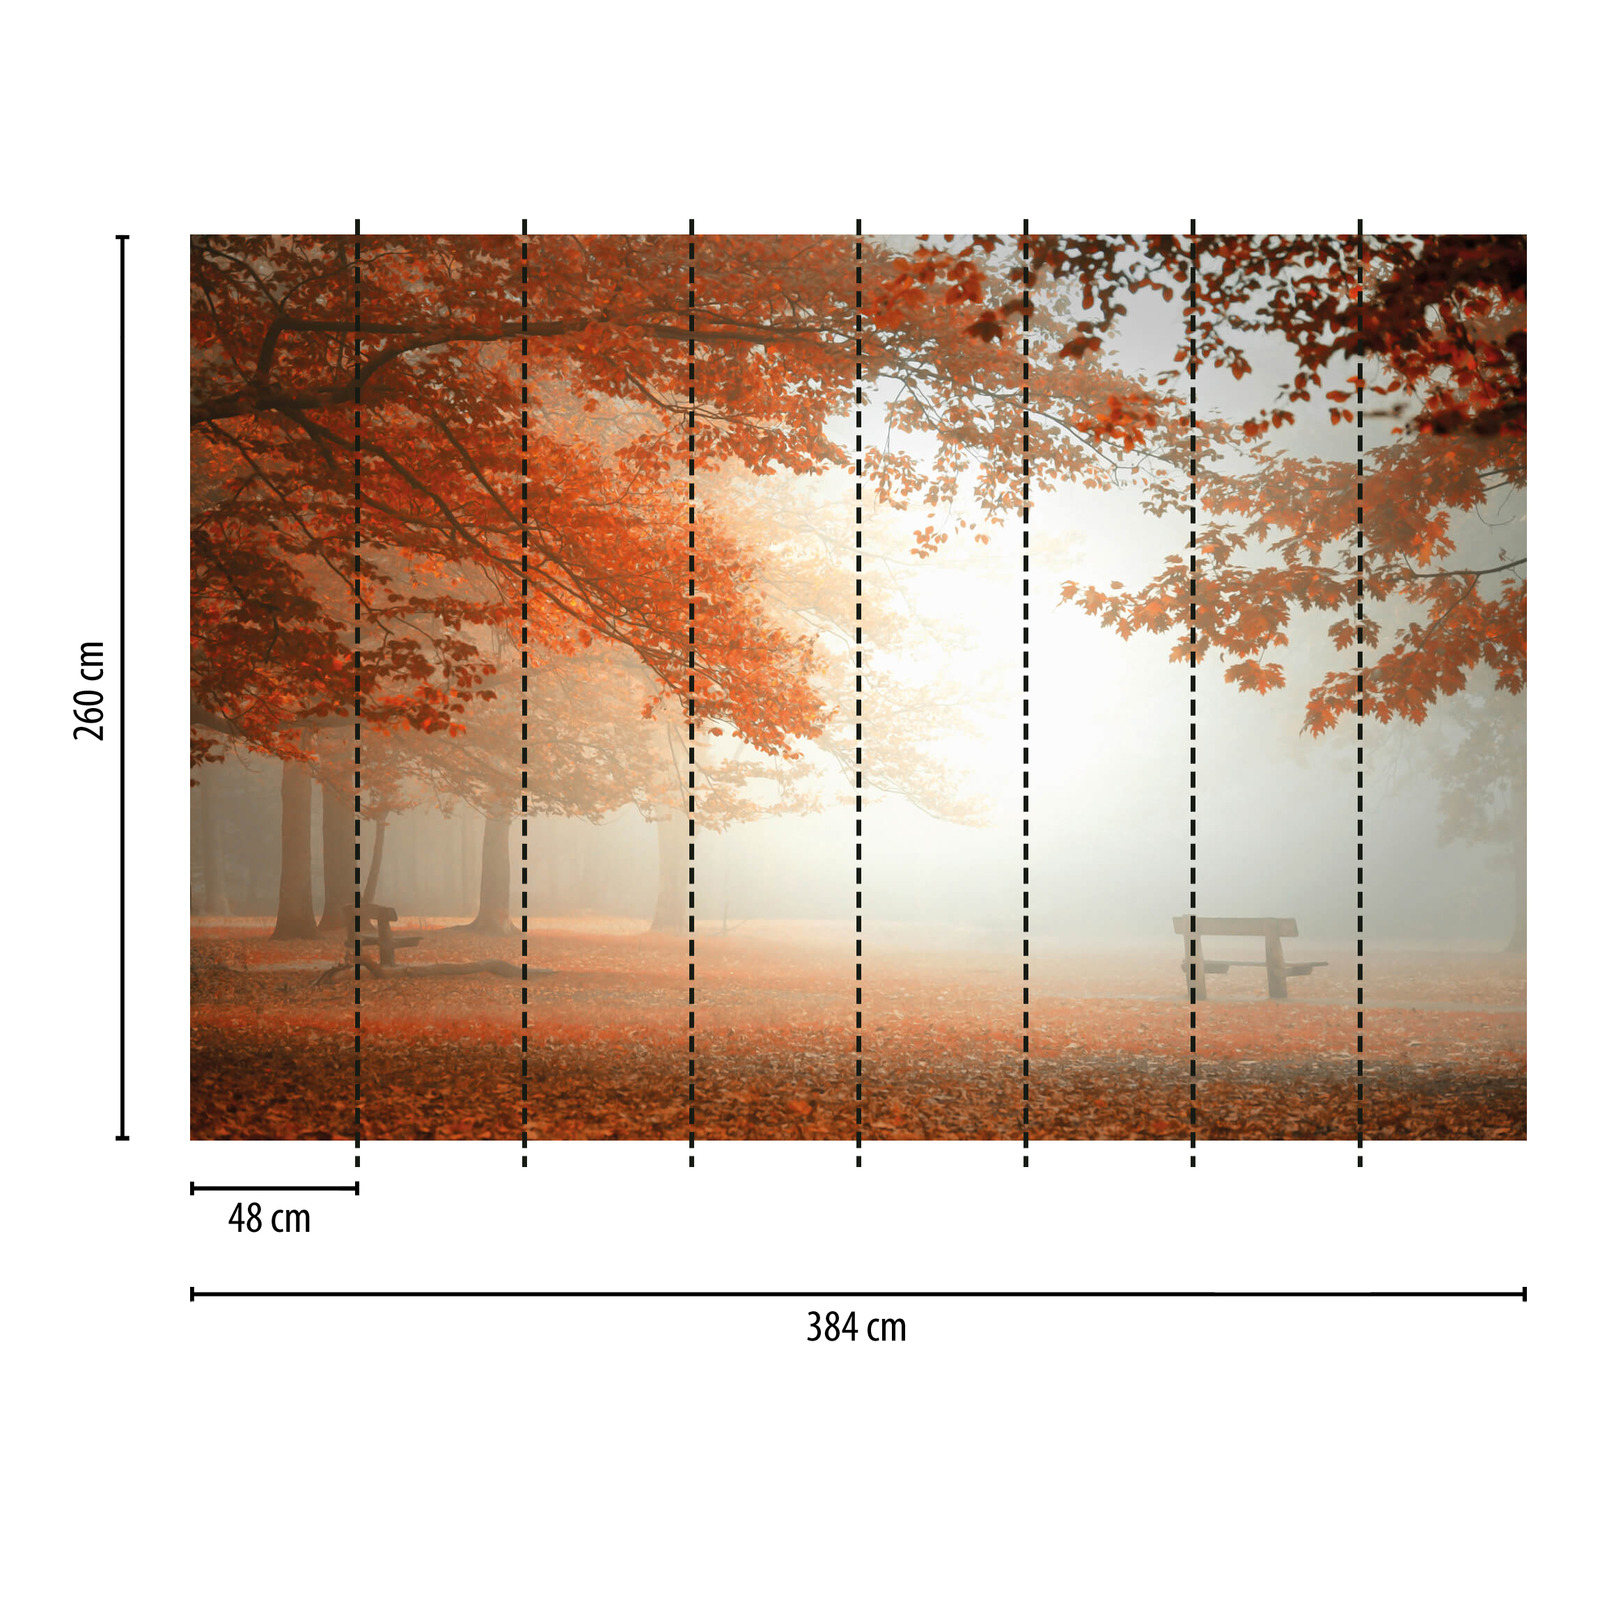             Autumn forest in the fog mural - orange, red, brown
        